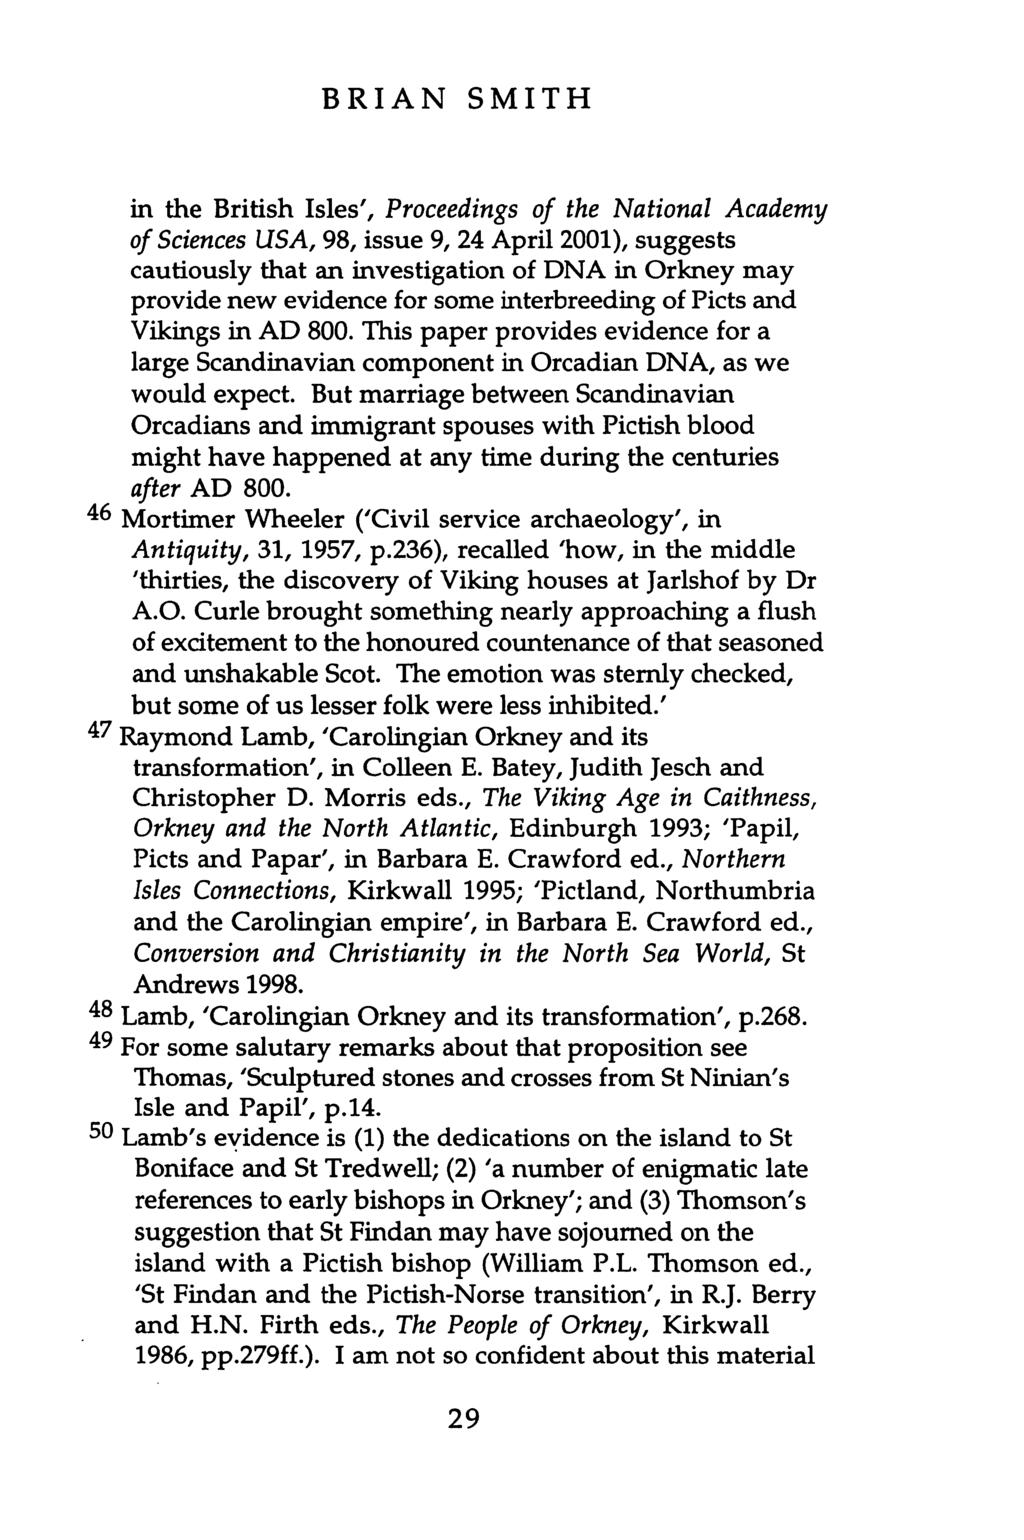 BRIAN SMITH in the British Isles', Proceedings of the National Academy of Sciences USA, 98, issue 9, 24 April 2001), suggests cautiously that an investigation of DNA in Orkney may provide new